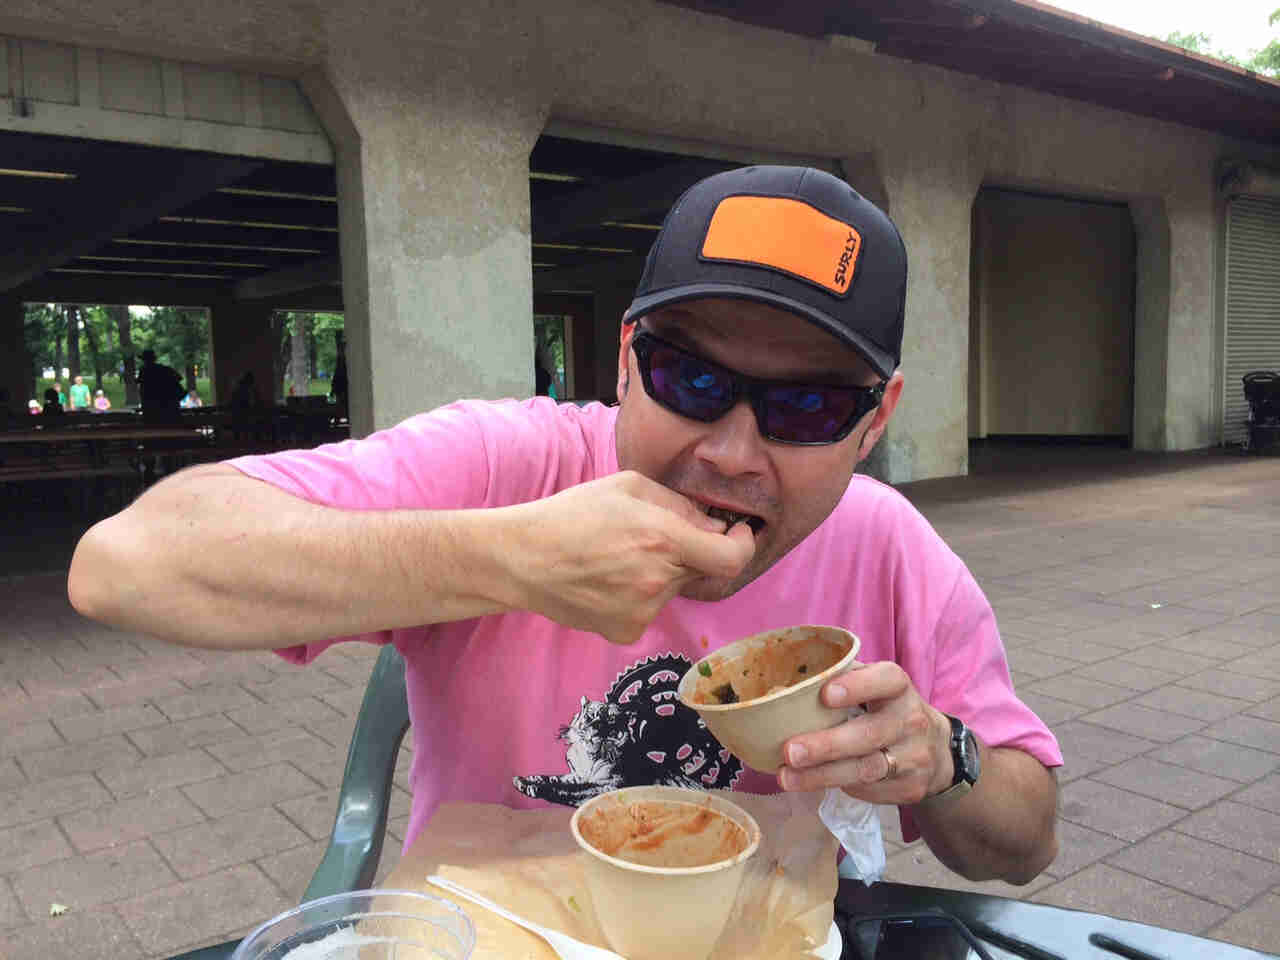 Front view of a person wearing a black Surly cap and sunglasses, sitting at a table, putting food into their mouth